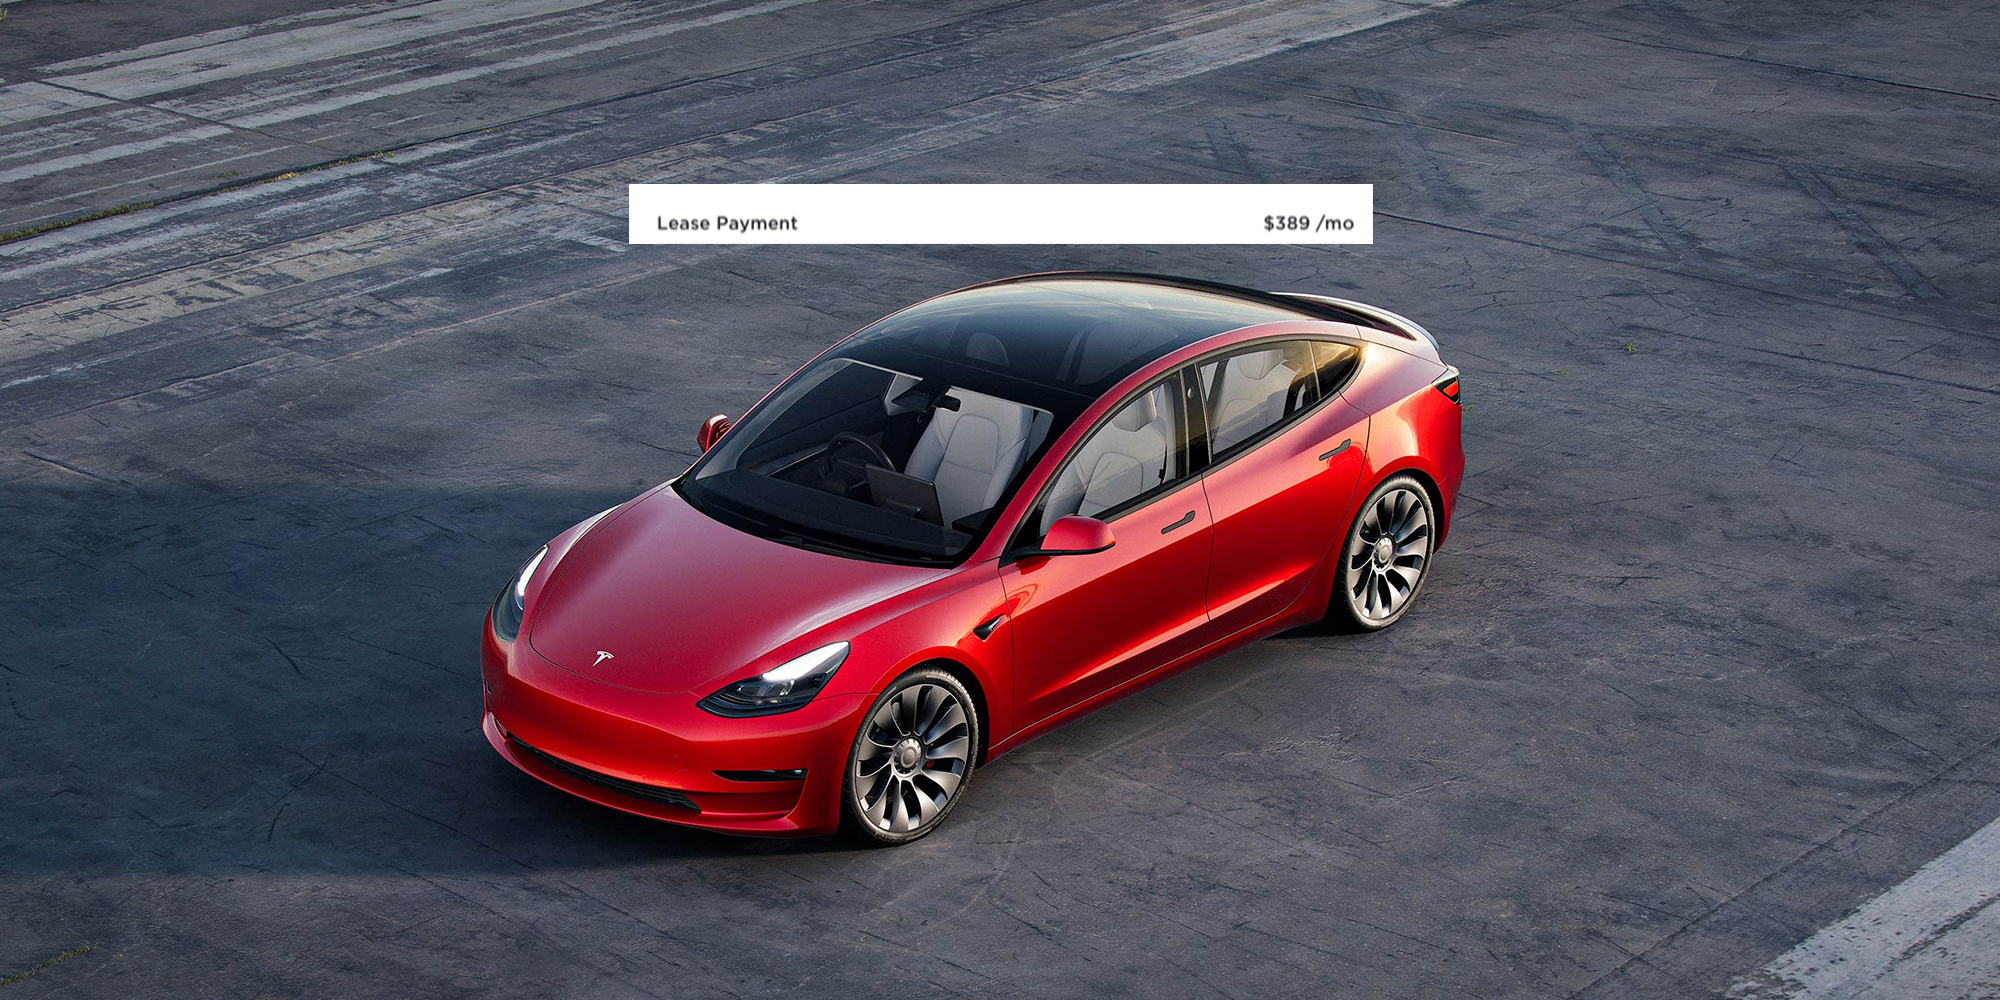 Cheapest Tesla Model 3 Highland Payment Costs Nearly $700/mo